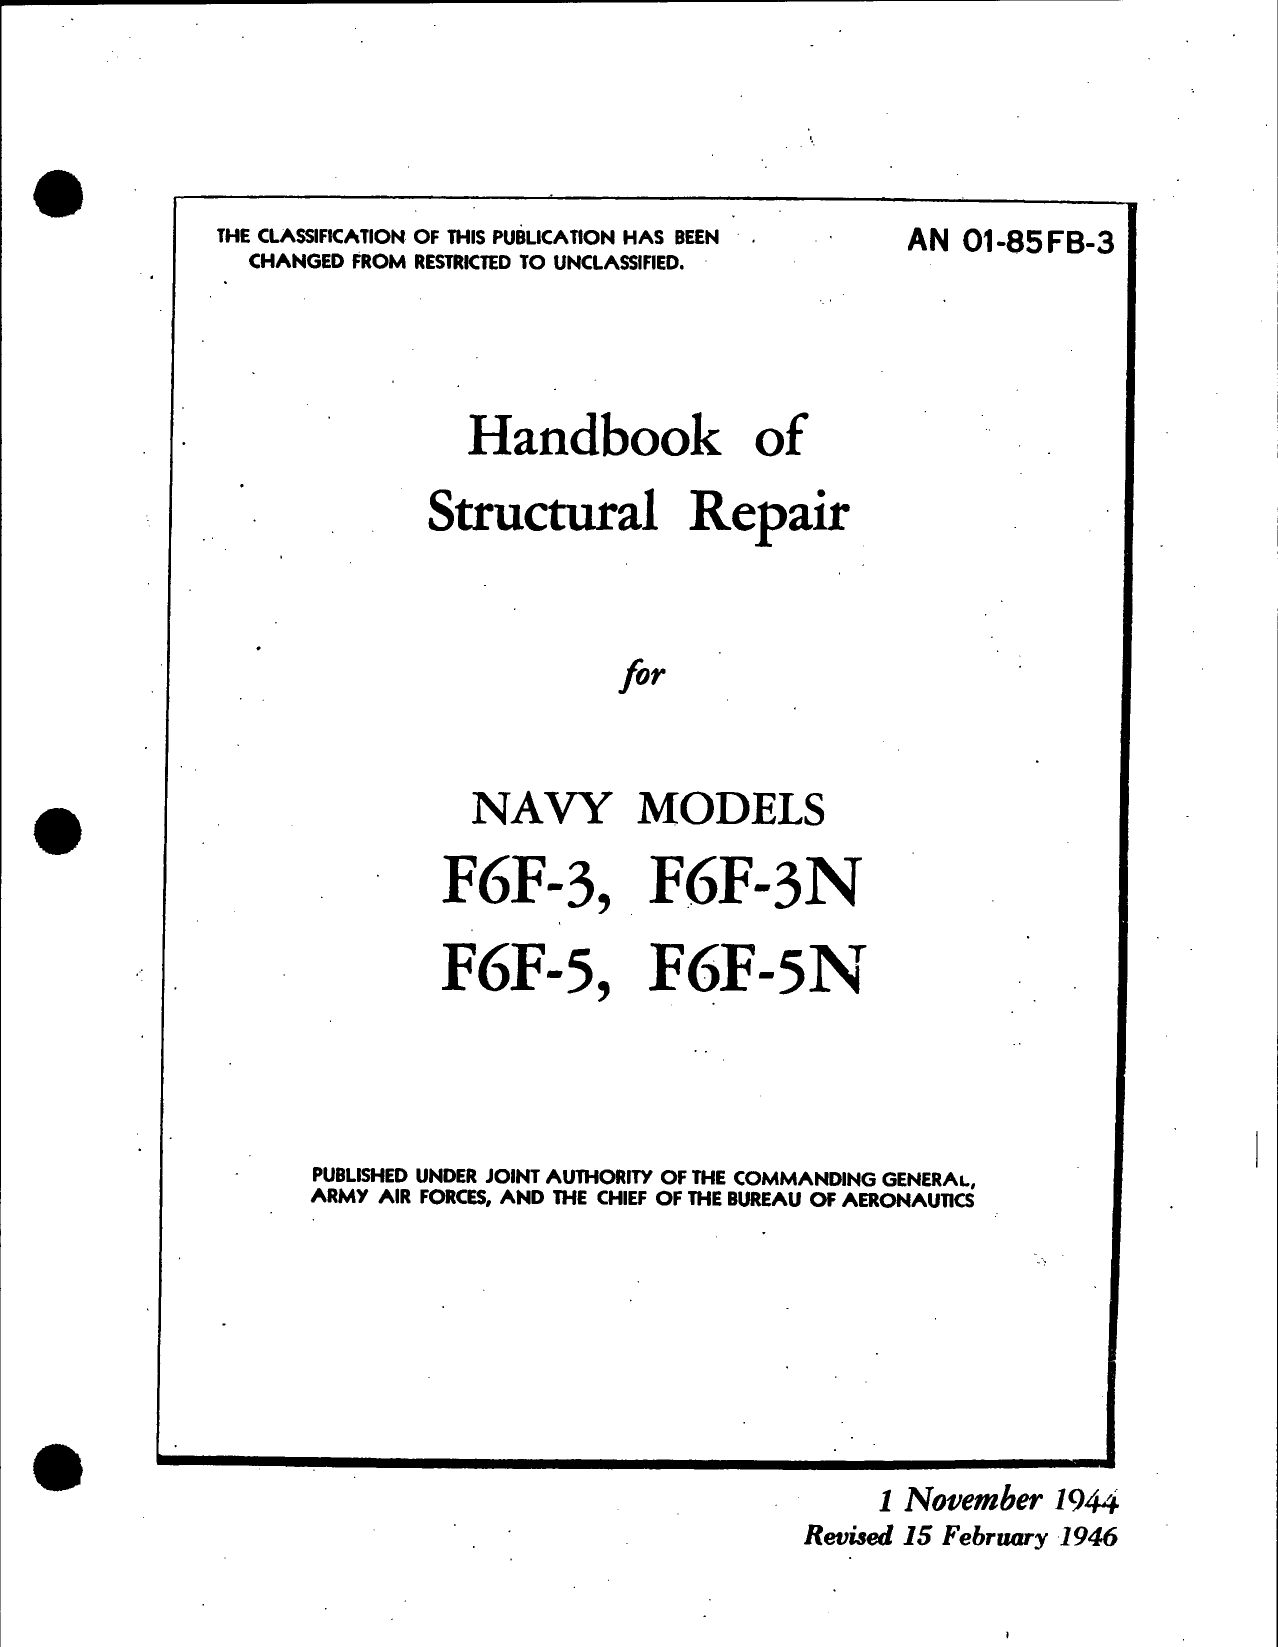 Sample page 1 from AirCorps Library document: Handbook of Structural Repair for Navy Models F6F-3, -3N, -5 and -5N